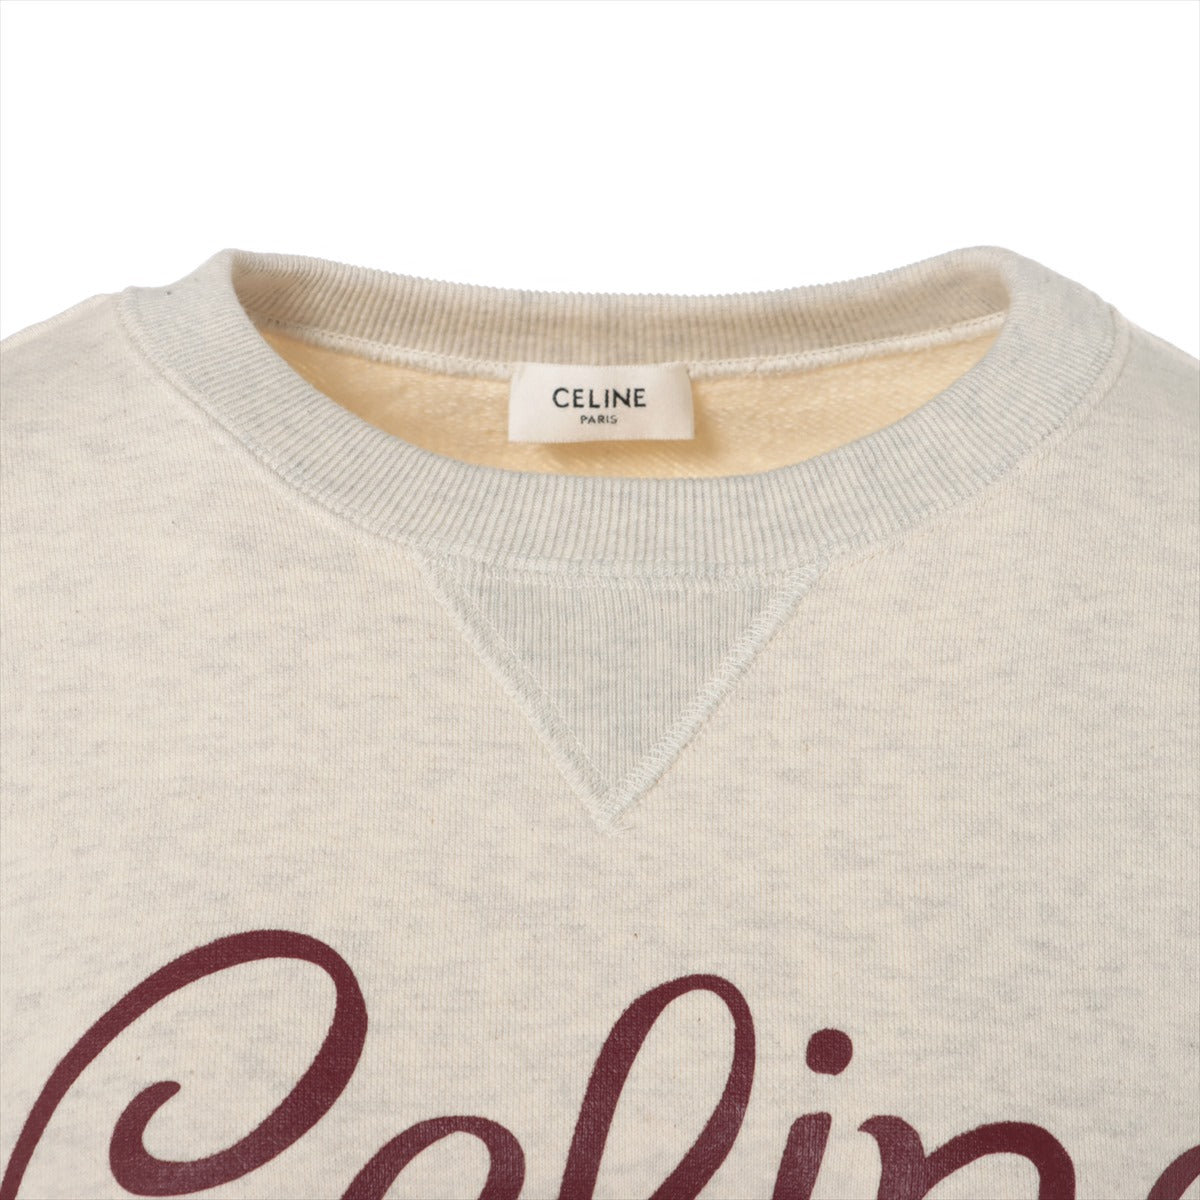 CELINE Cotton Basic knitted fabric XS Ladies' Grey  2Y87D649W